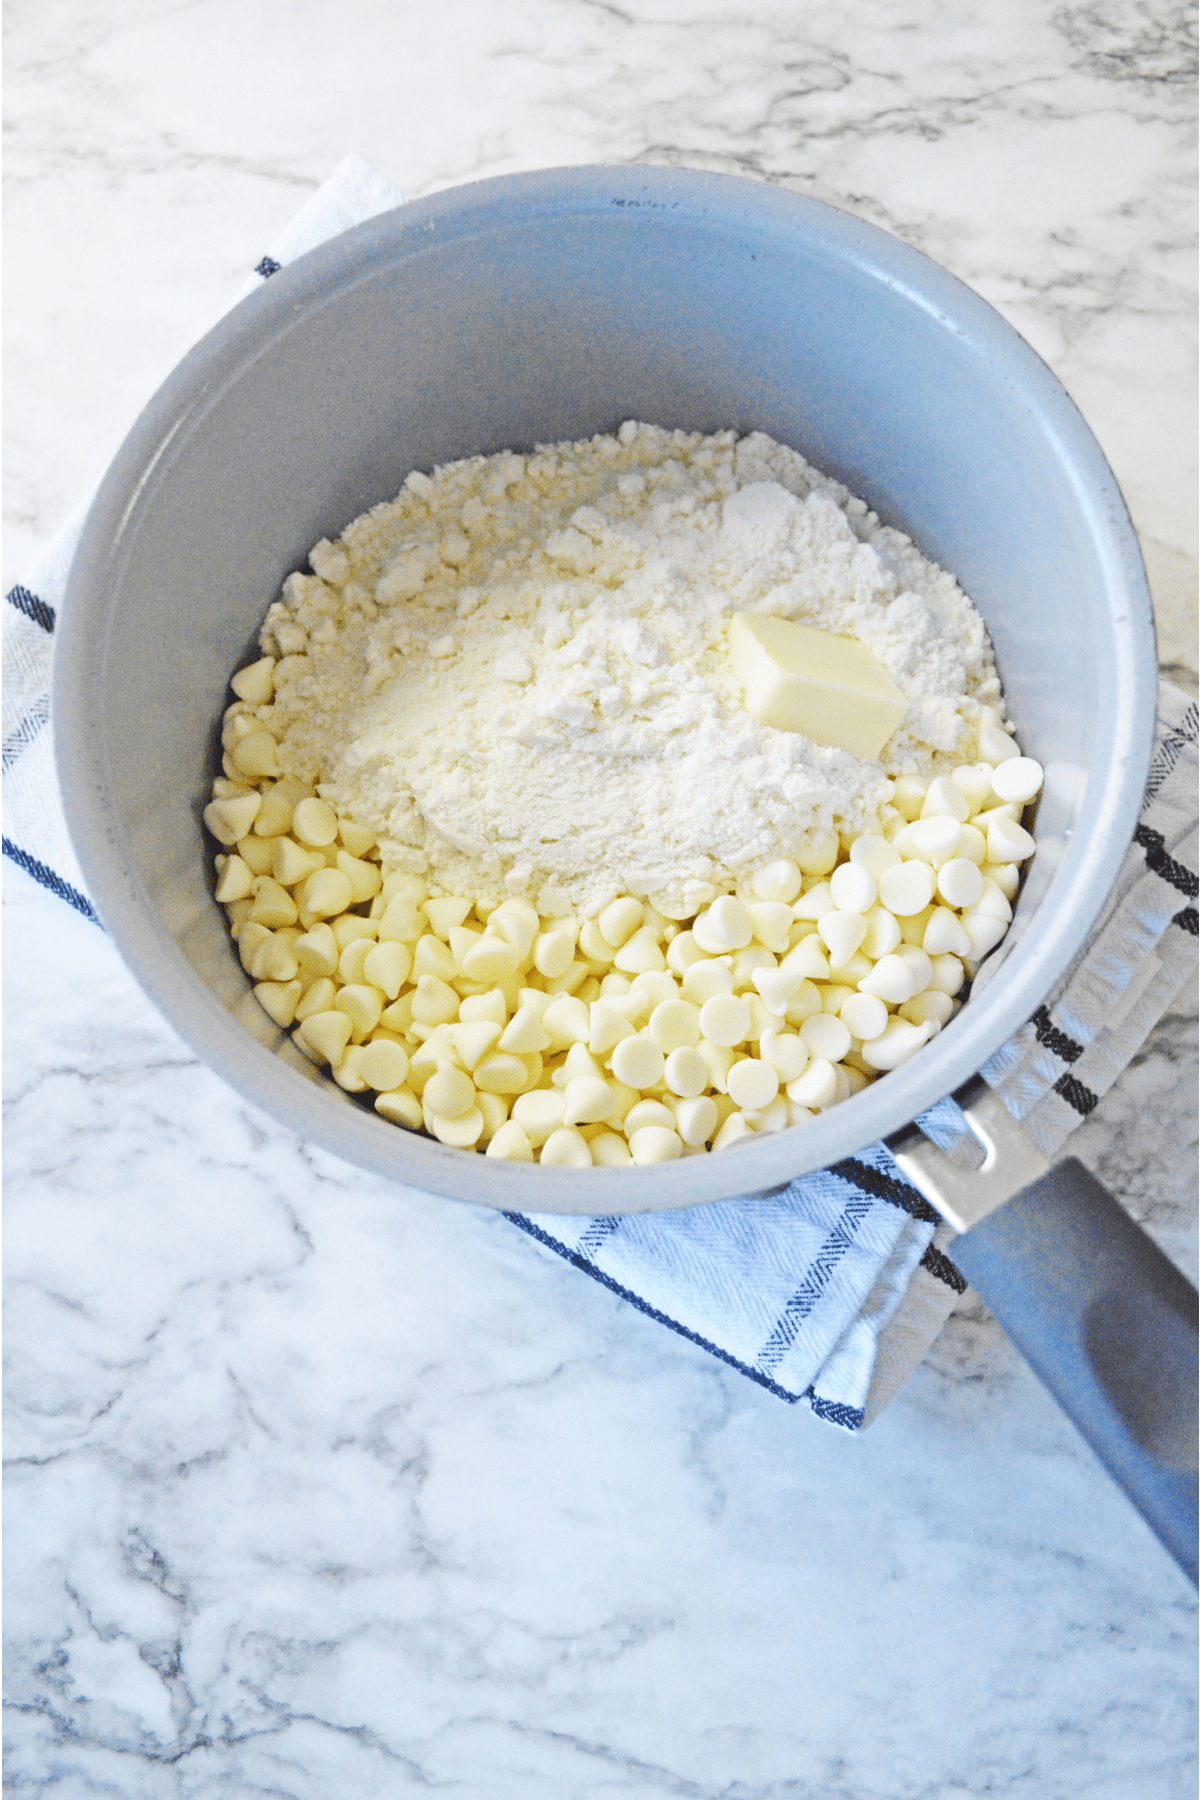 Cookie mix in saucepan with butter and white chocolate